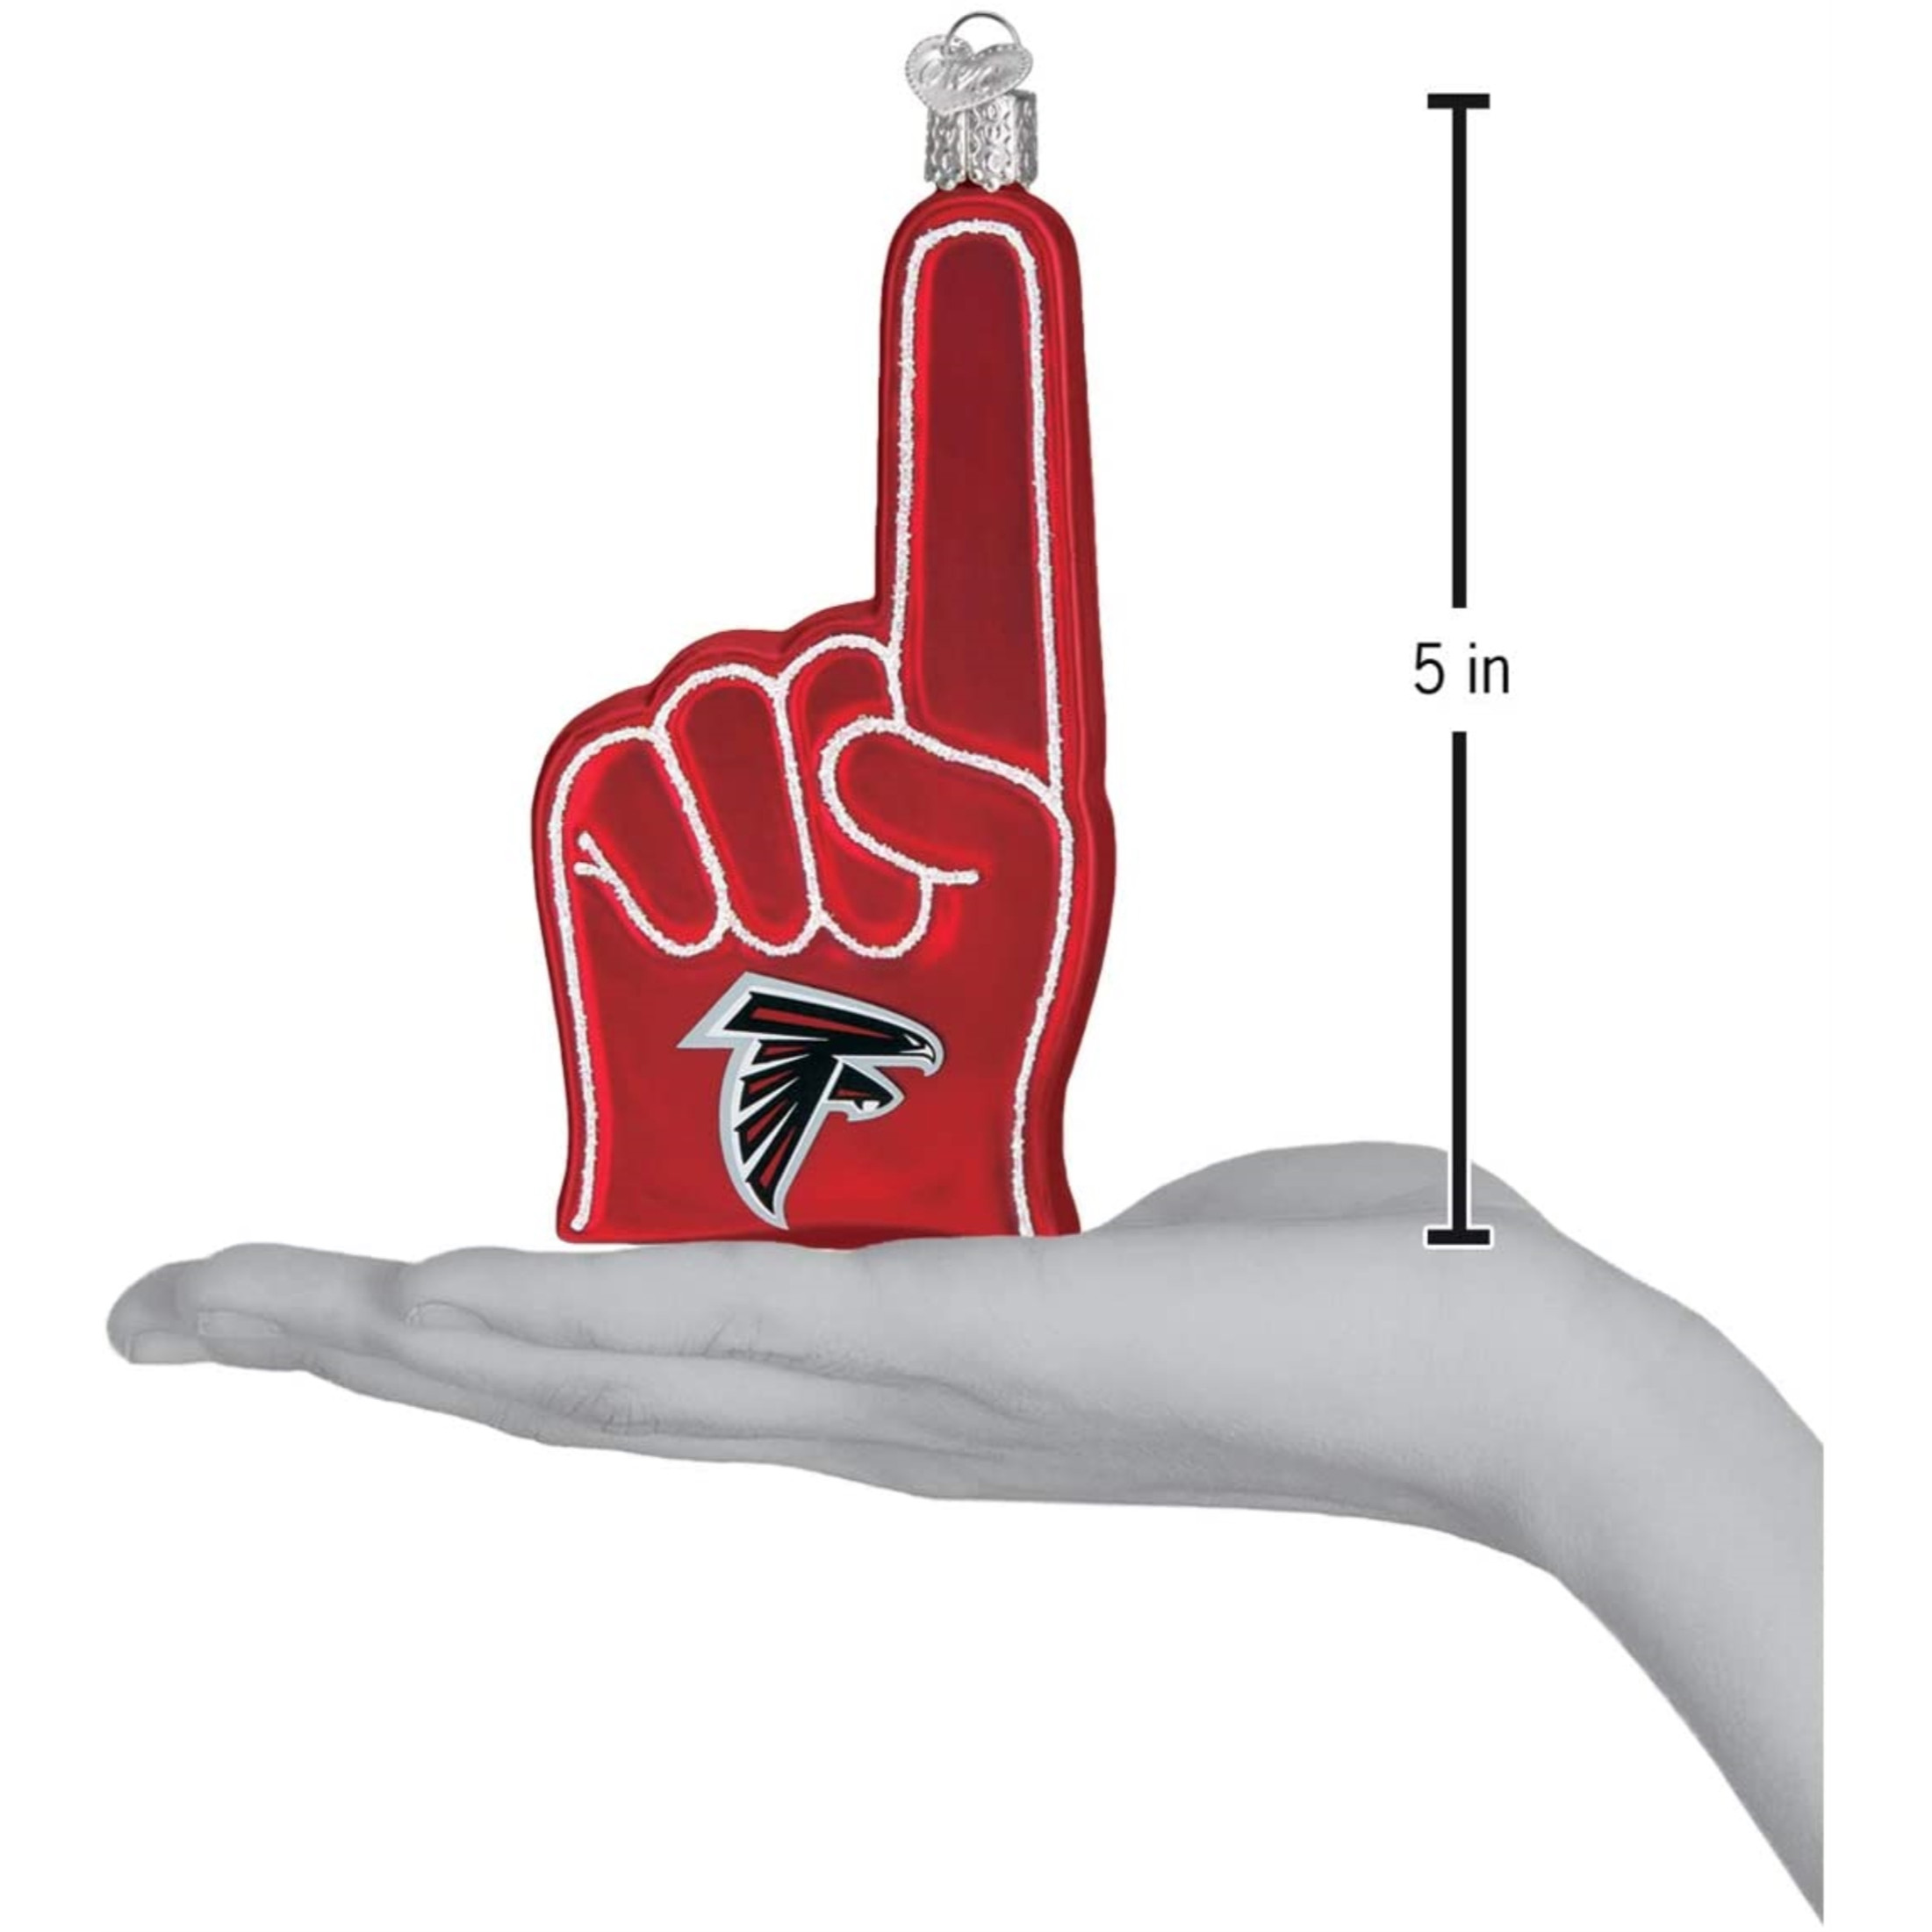 Old World Christmas Glass Blown Ornament For Christmas Tree, Atlanta Falcons Foam Finger (With OWC Gift Box)